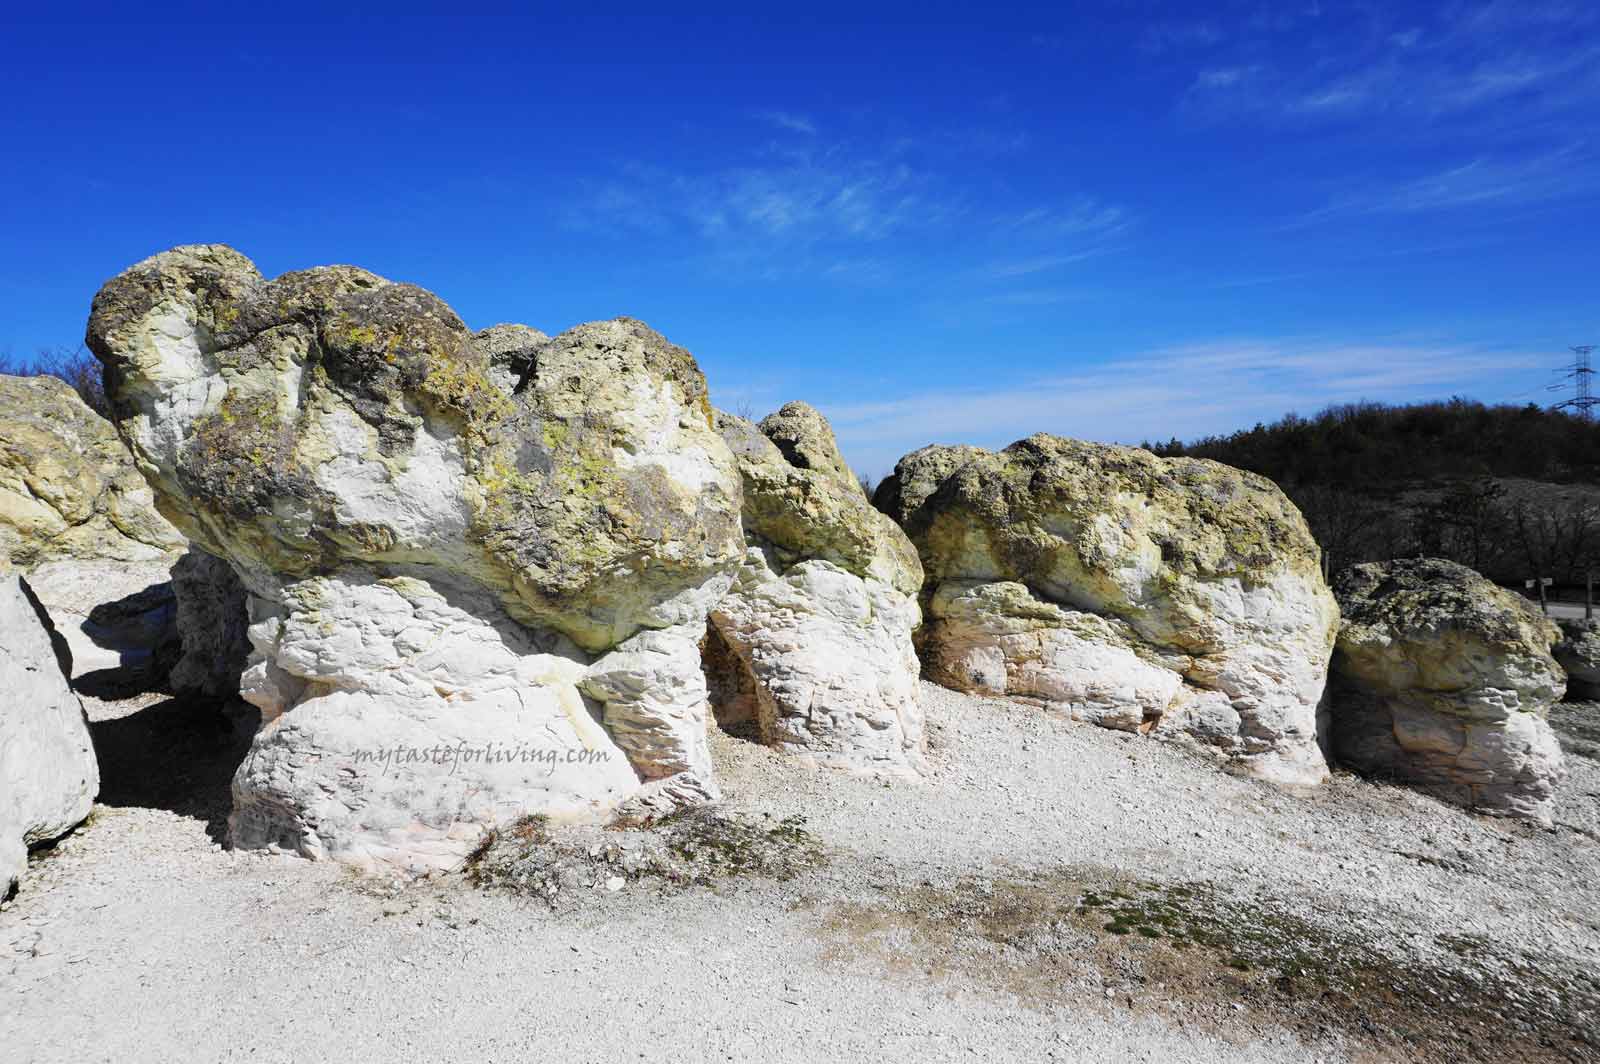 The natural phenomenon Stone Mushrooms is a landmark that is worth visiting if you pass near the village of Beli Plast (which is located next to the road Haskovo-Kardzhali). They are also known as Rock Mushrooms, and the locals call them Mantarkaya.